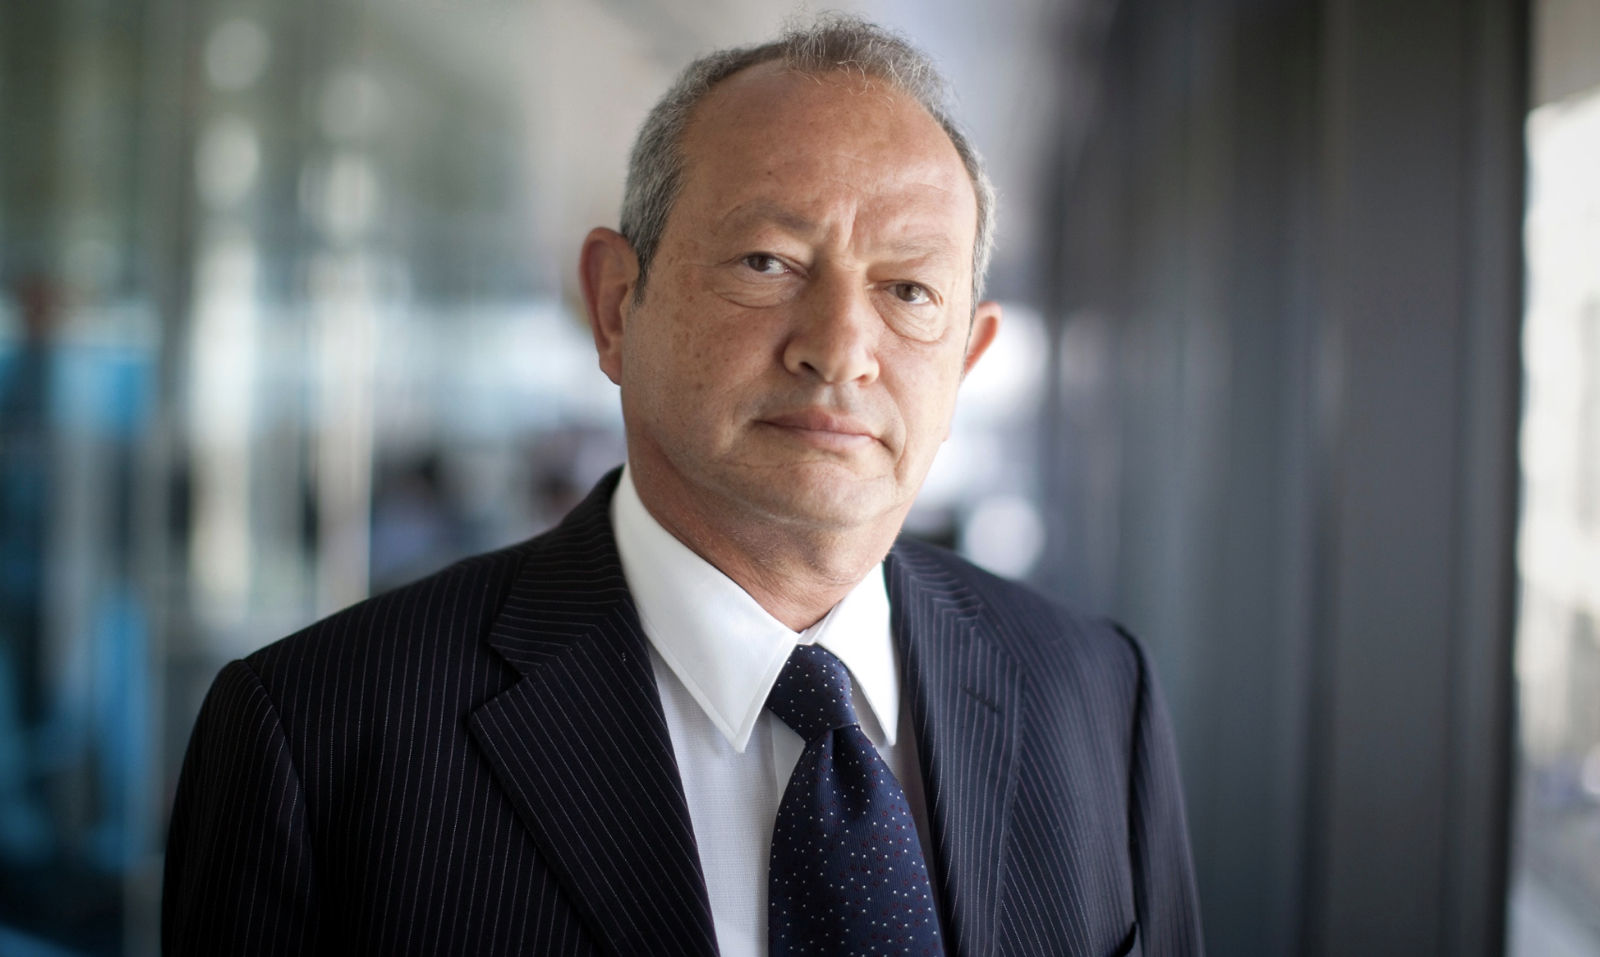 Naguib Sawiris Net Worth -  A Look At The Egyptian Billionaire's Fortune